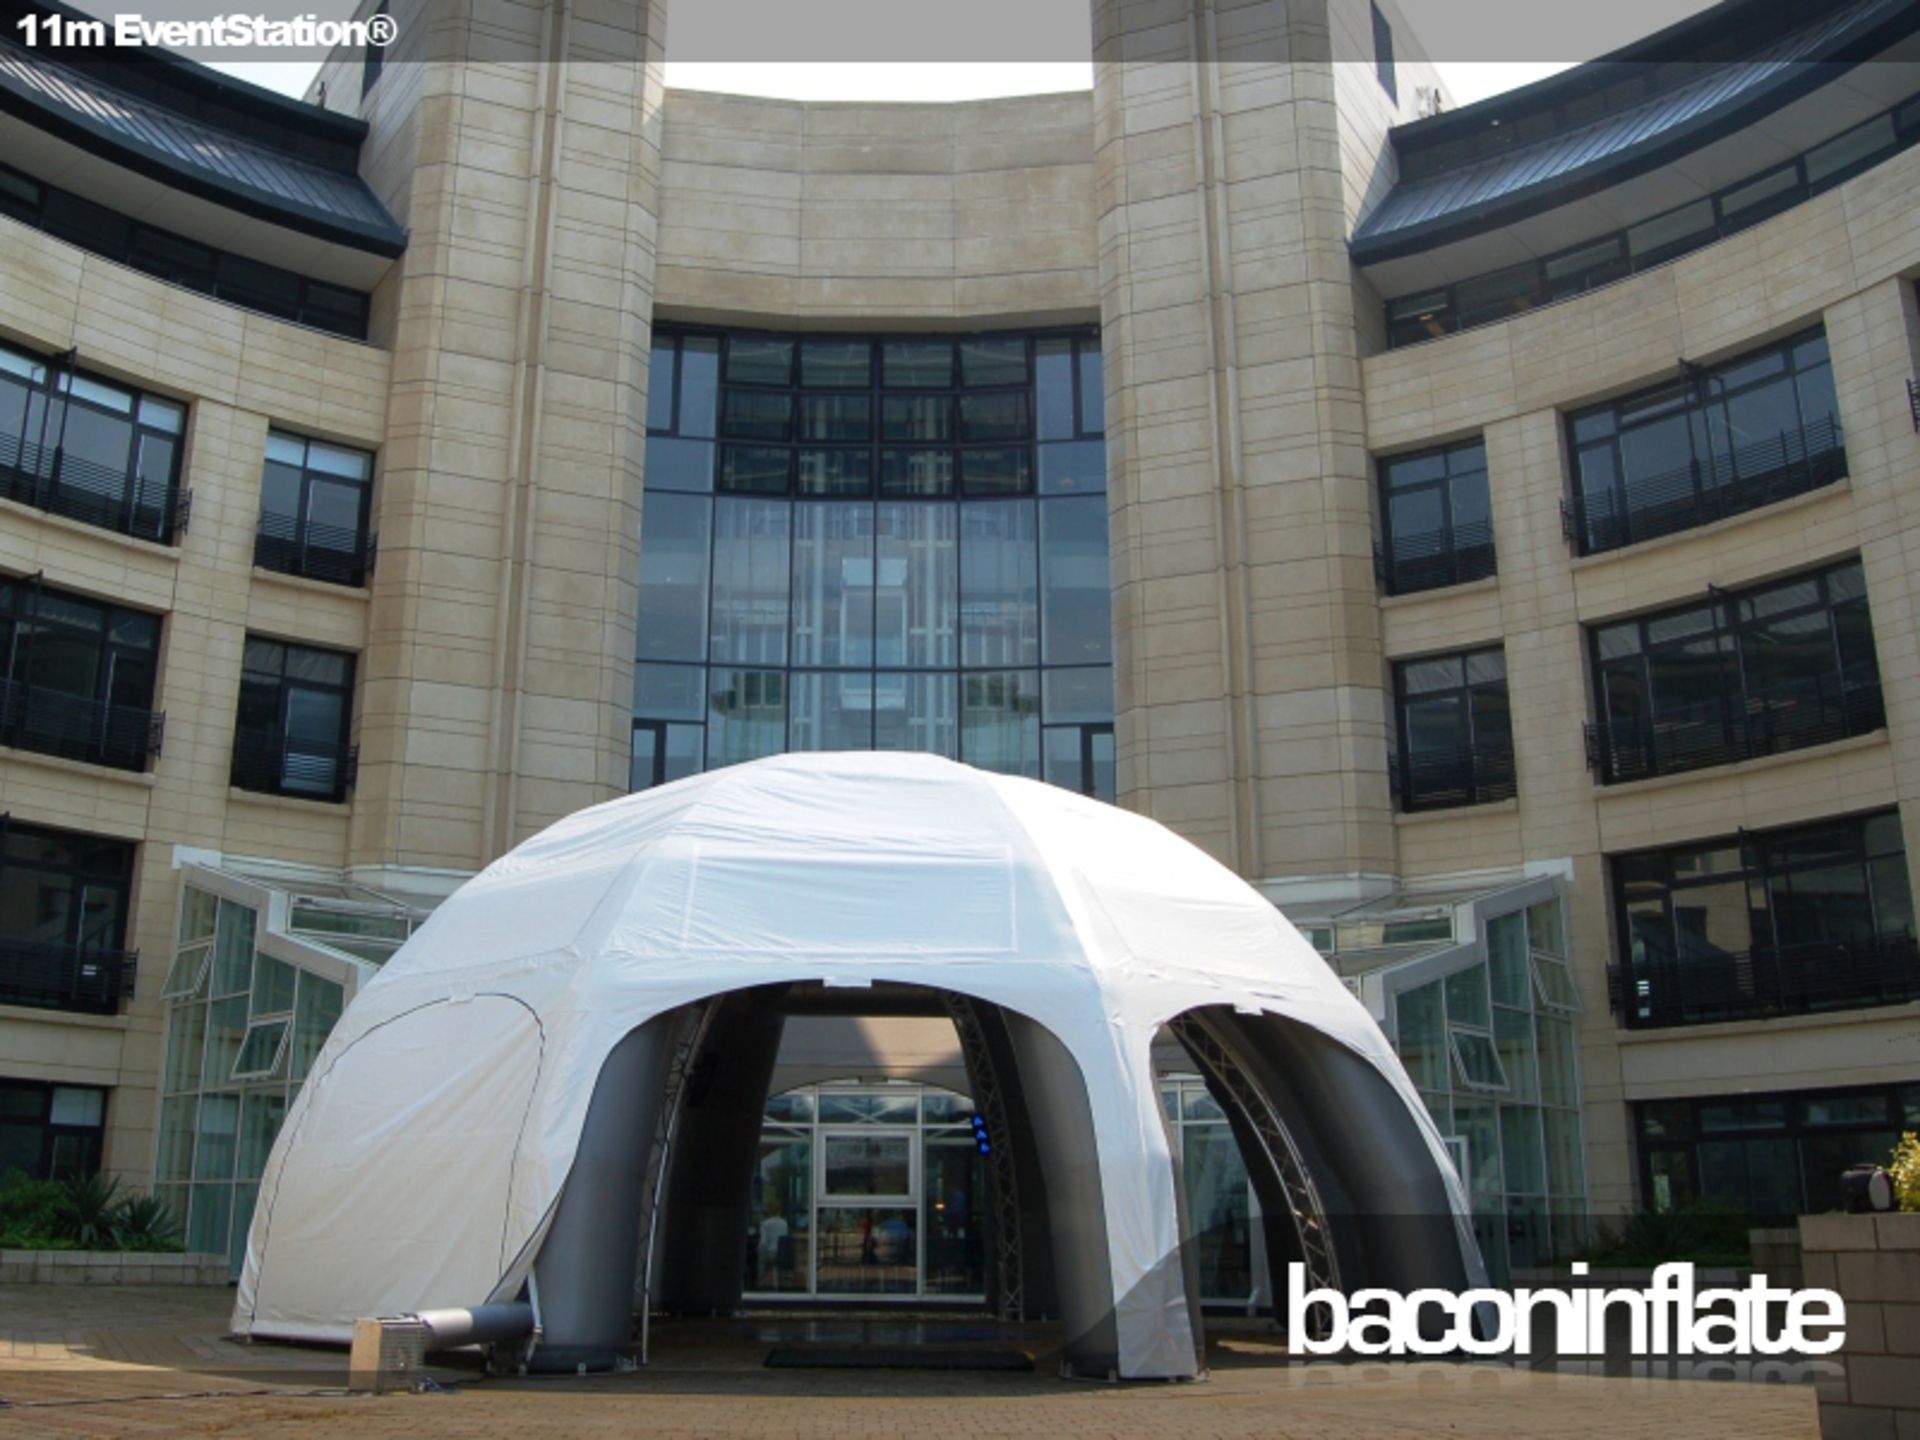 11m EventStation Leg Unit Inflatable Structure with Canopy (2 Bags) (Stock No’s; BiES & BiES 11/ - Image 4 of 12